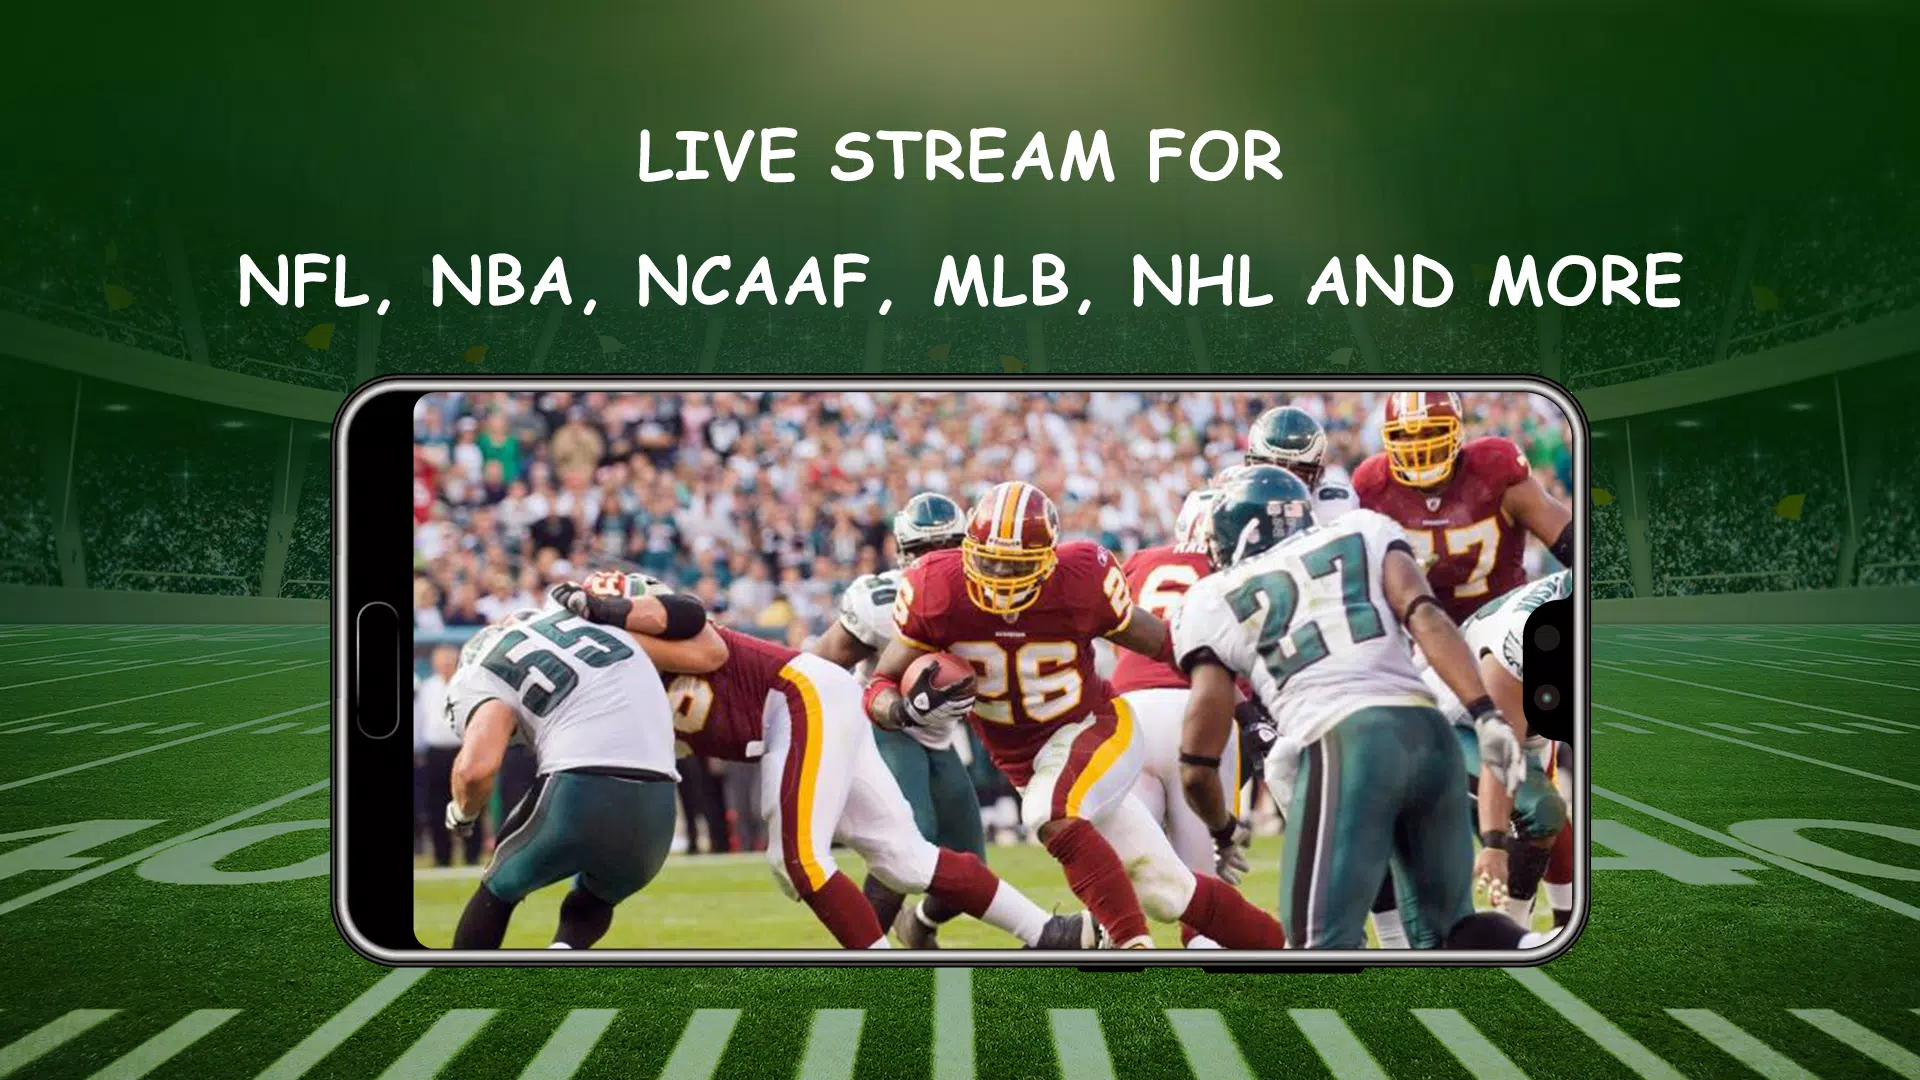 Bozi Live Stream for NFL NBA NCAAF MLB NHL for Android - APK Download